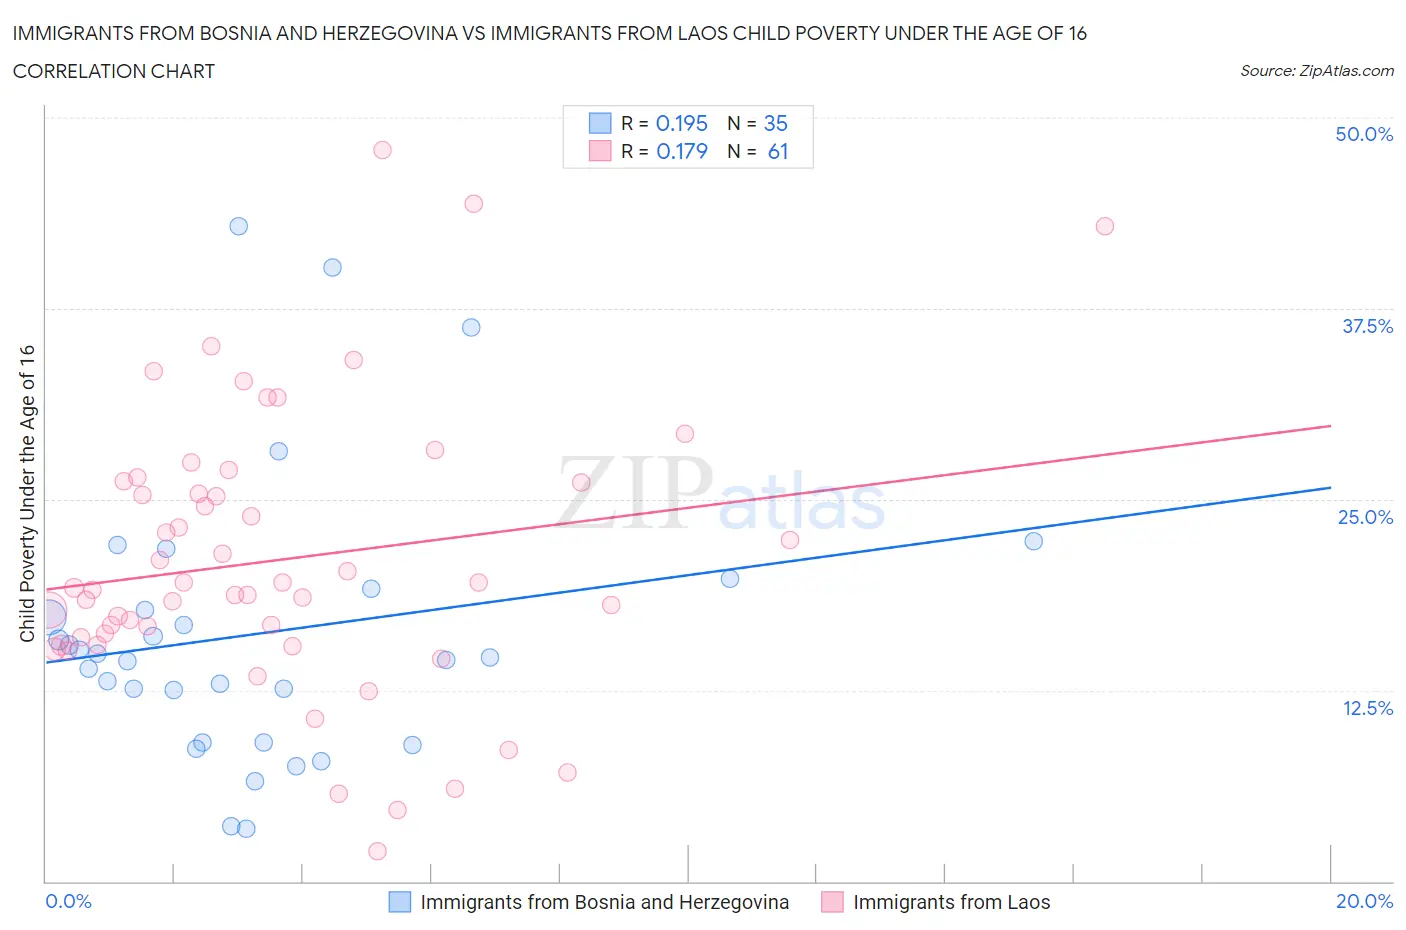 Immigrants from Bosnia and Herzegovina vs Immigrants from Laos Child Poverty Under the Age of 16